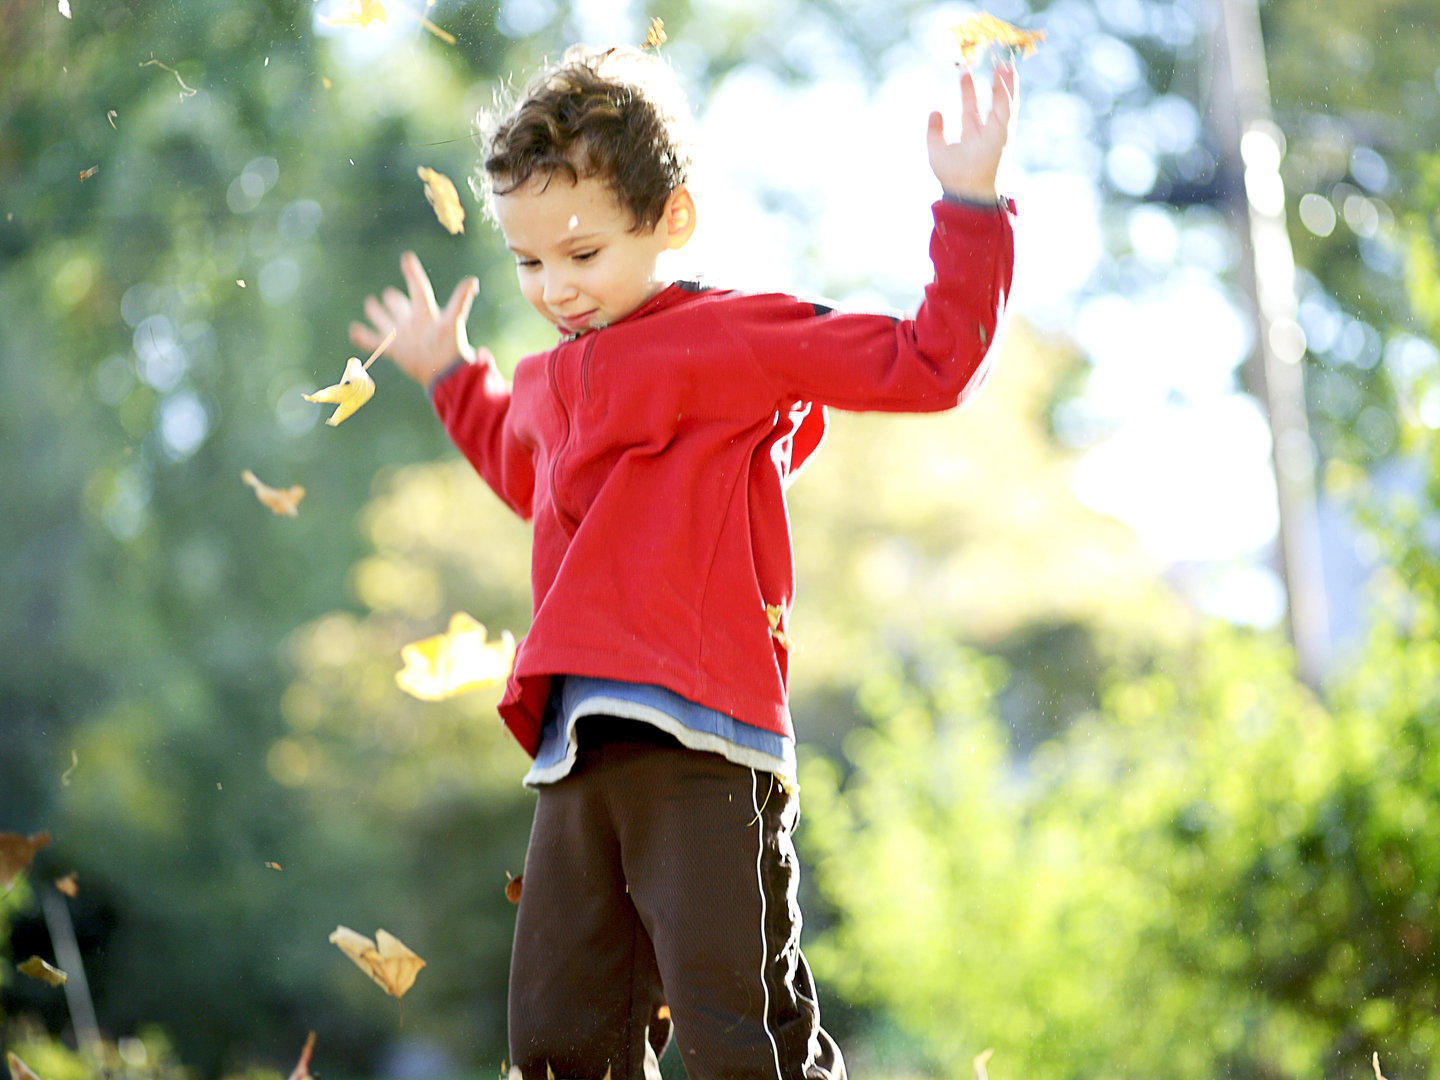 Action shot of boy tossing autumn leaves up into the air. The colors of the leaves are so colorful, the crunch and crackle of the leaves sounds so good and it is so much fun to watch the leaves float to the ground.